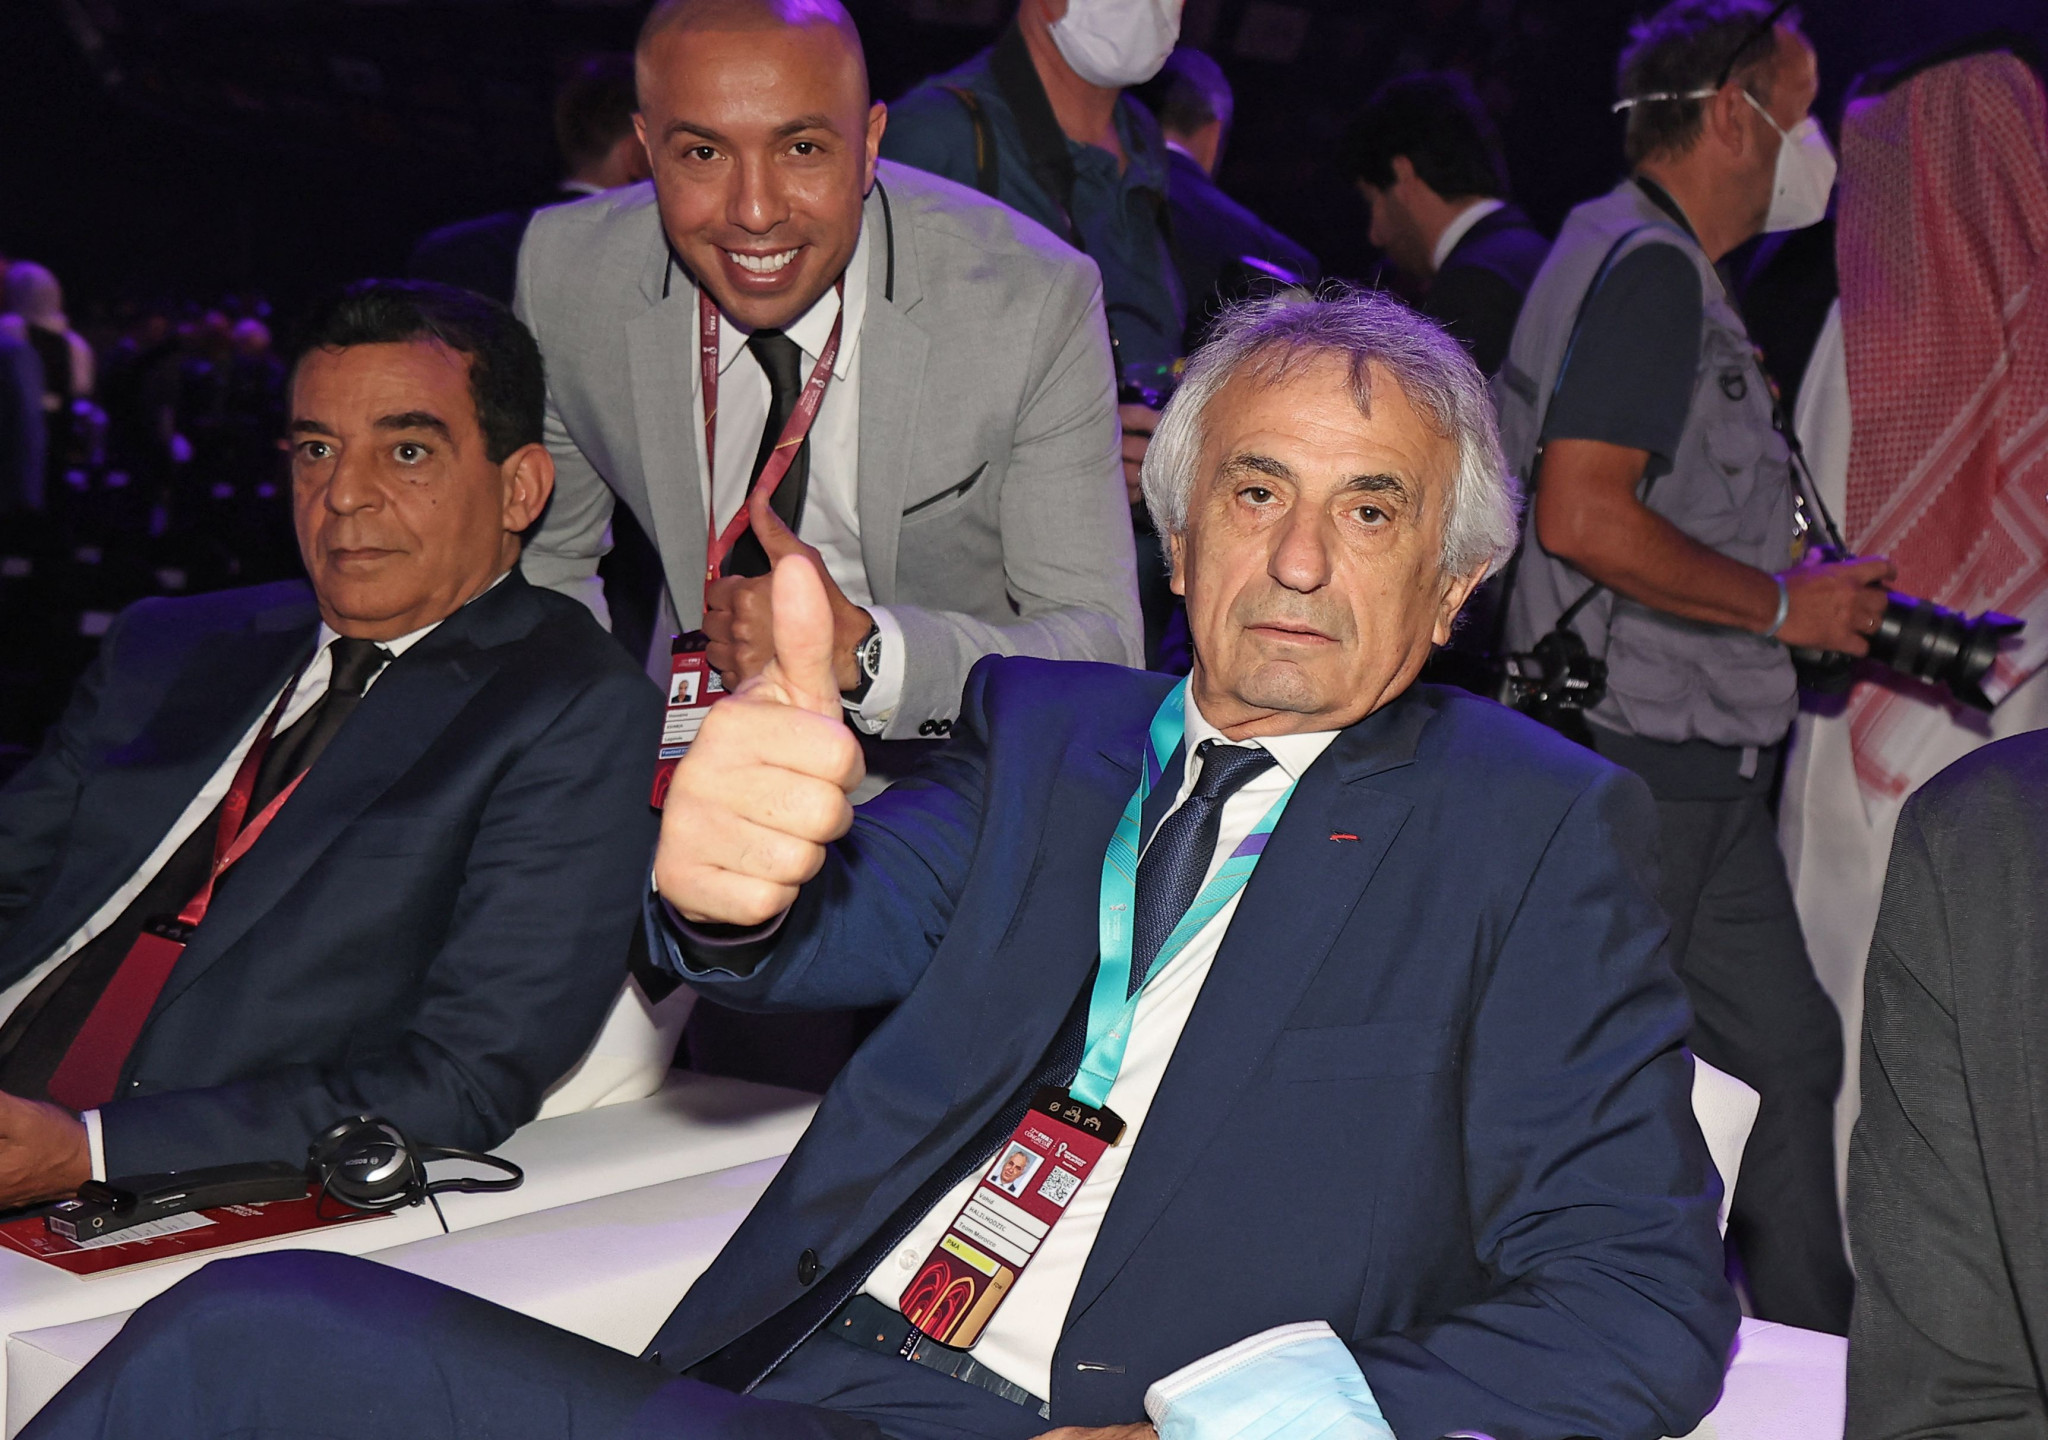 Halilhodžić sacked as Morocco manager shortly before FIFA World Cup